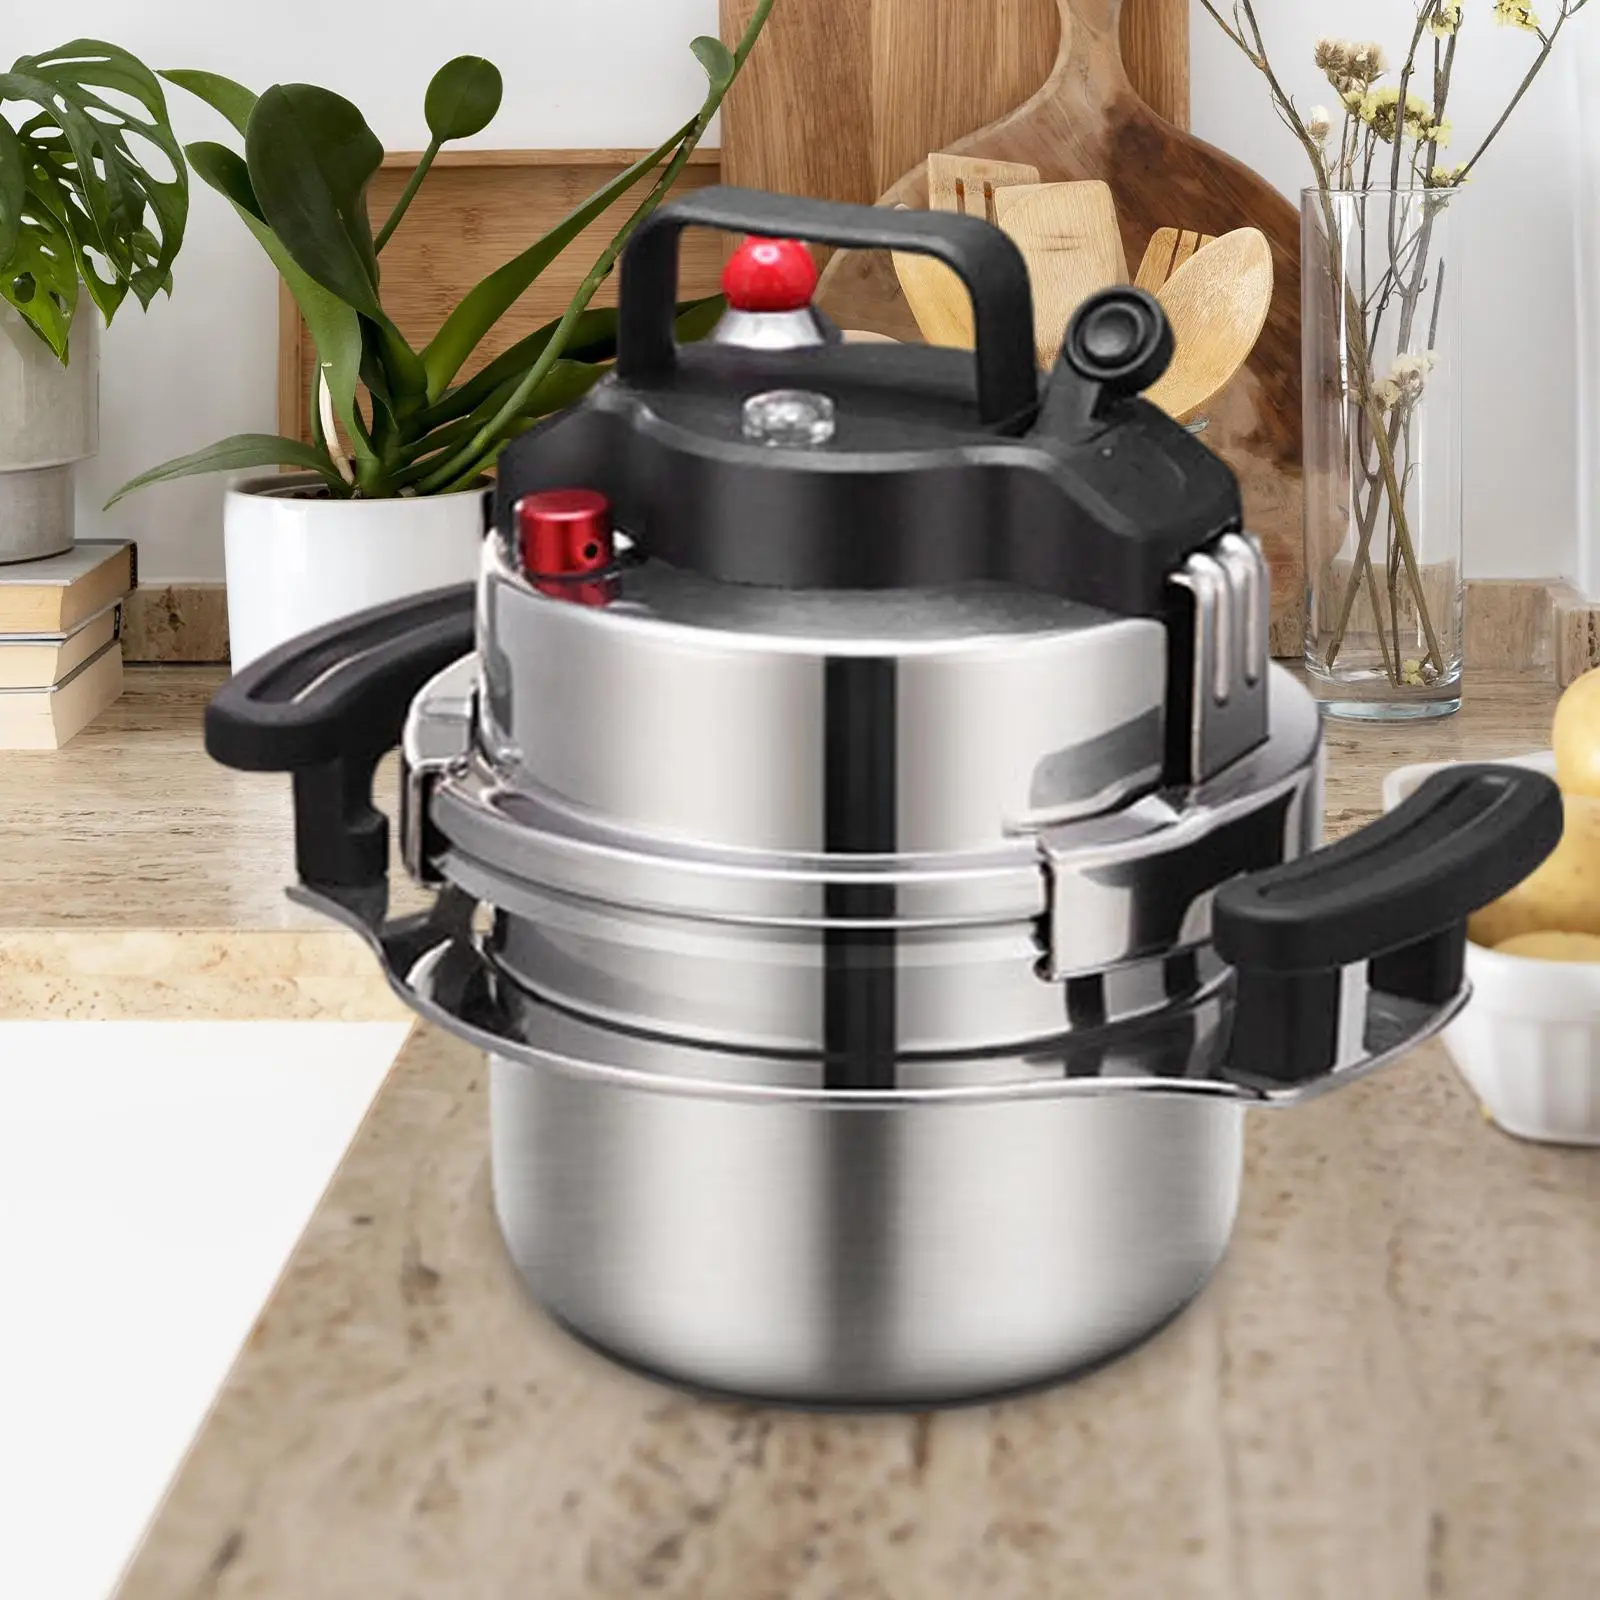 2L Stainless Steel Pressure Cooker Kitchen Cooking Pot Cookware Fast